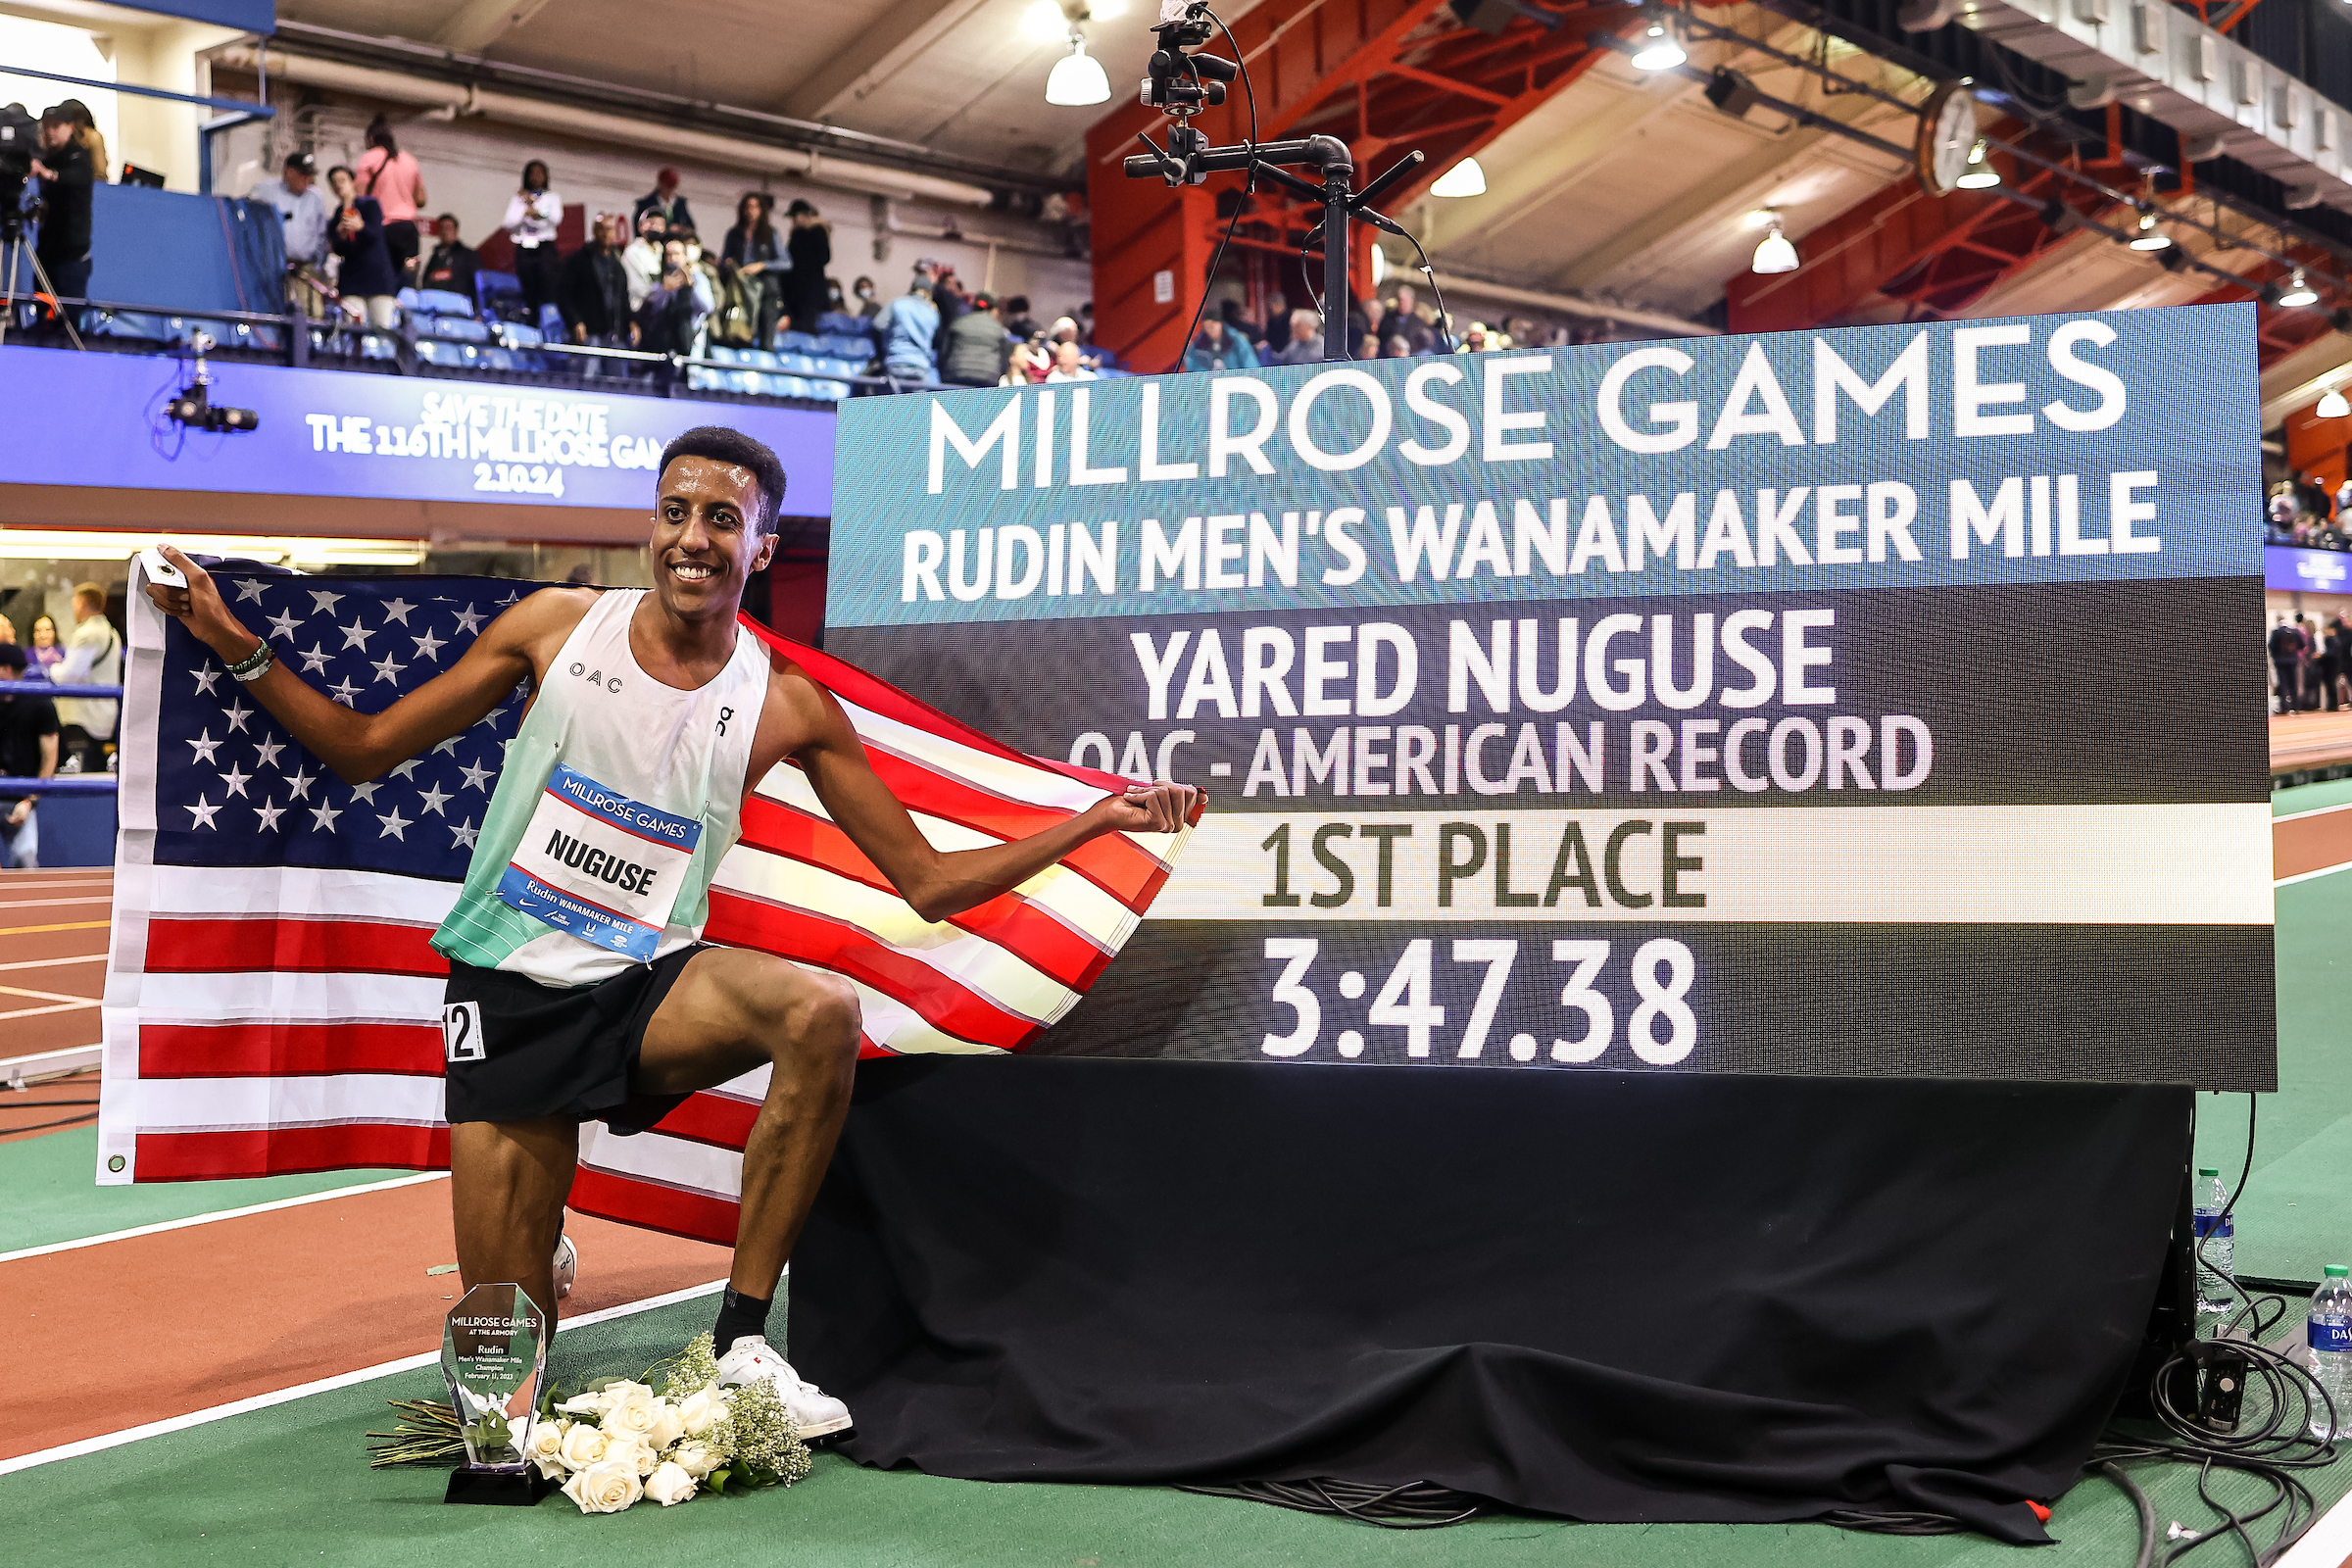 Yared Nuguse Dazzles Millrose Games with 347.38 Mile to Arrive as a Star